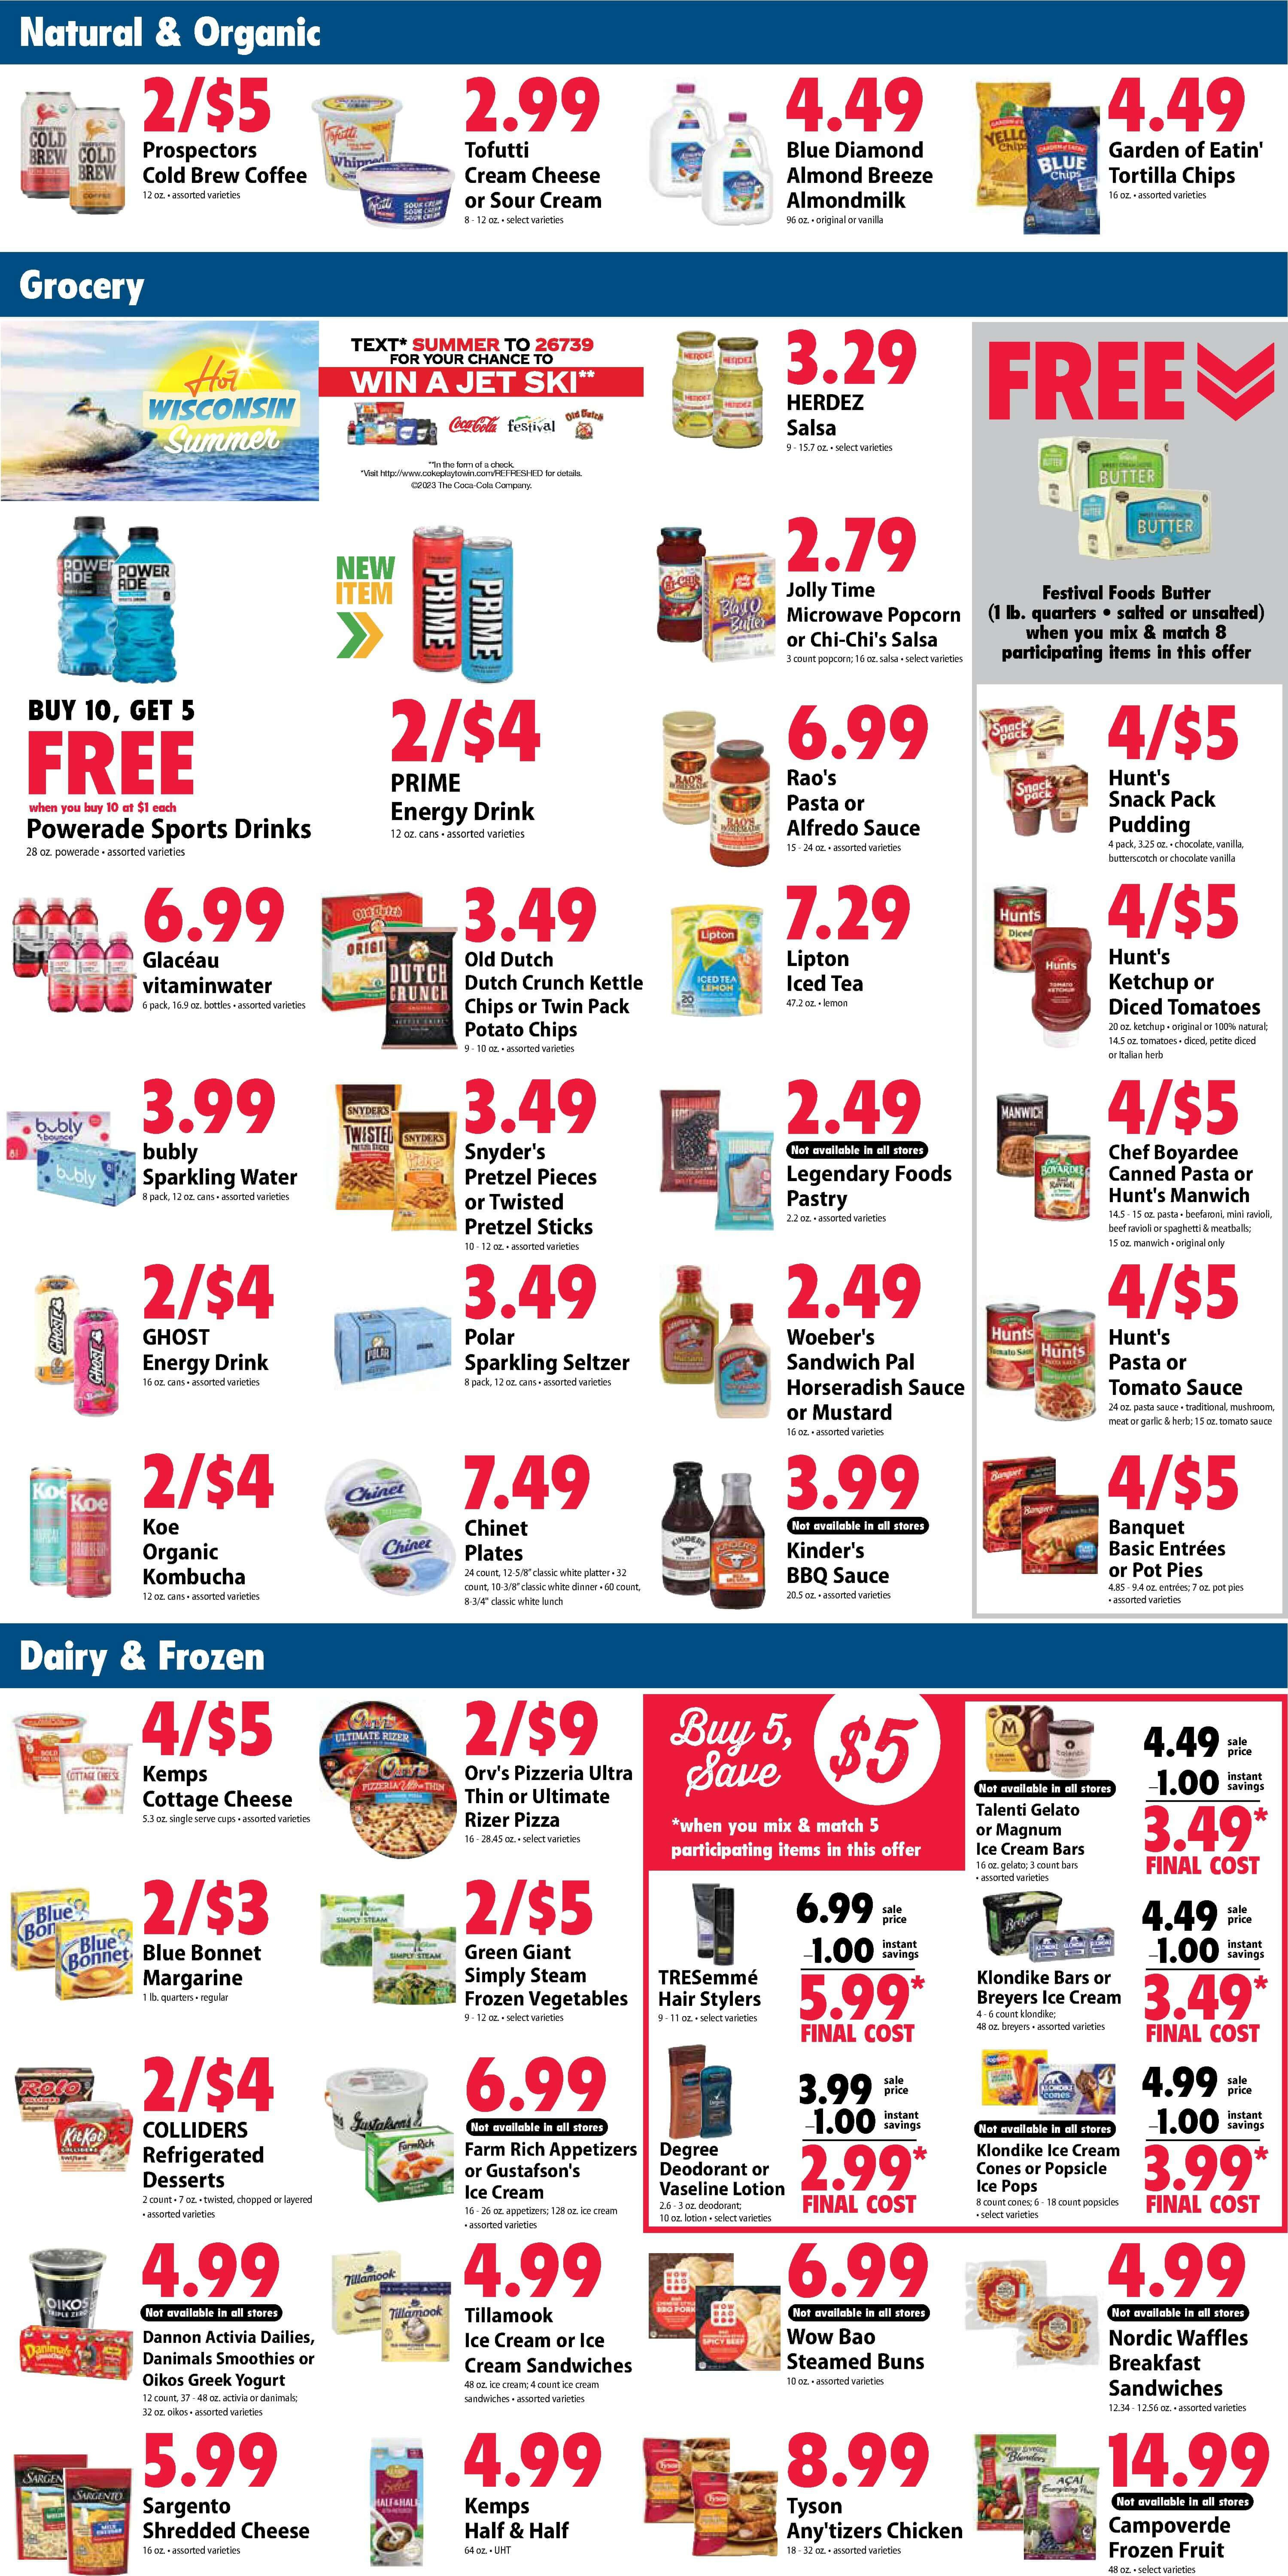 Festival Foods Weekly Ad from May 17